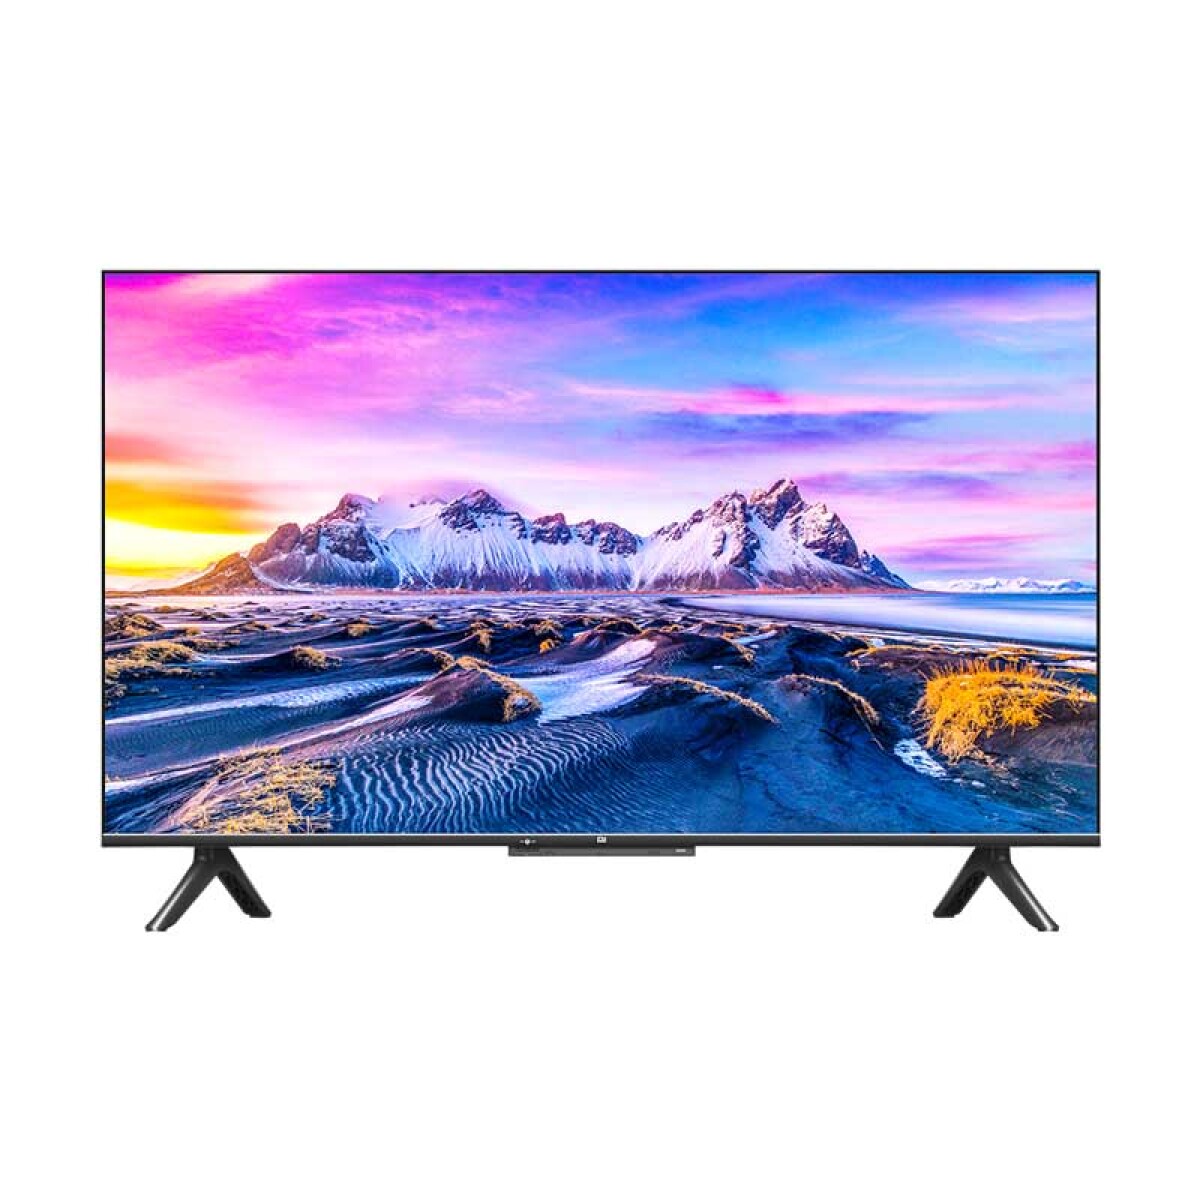 Smart Tv Led Xiaomi L32m6-6a Android Tv Google Asitente 